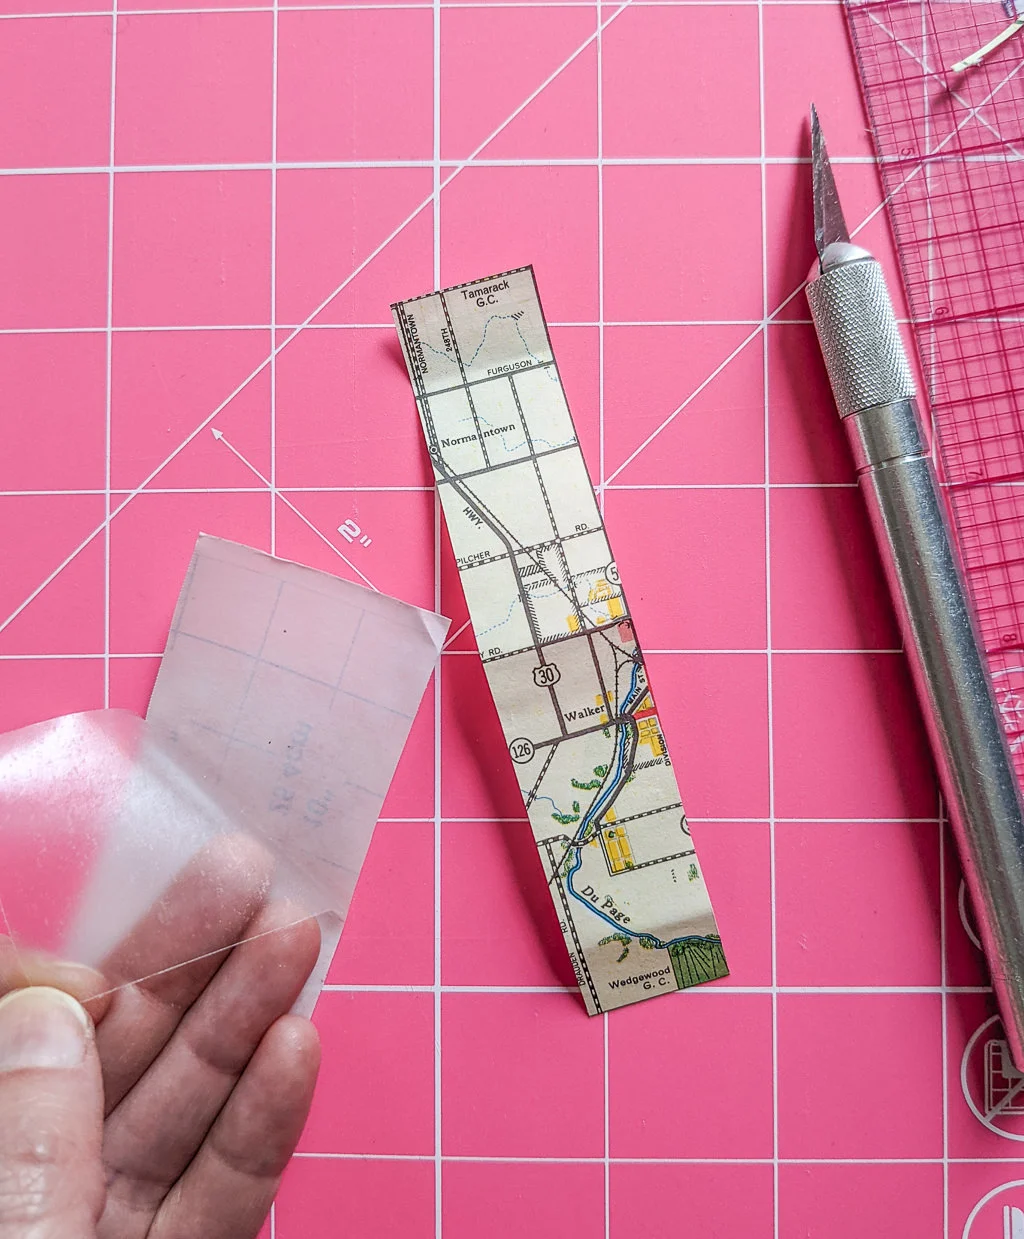 How to make paper water resistant rather than waterproof